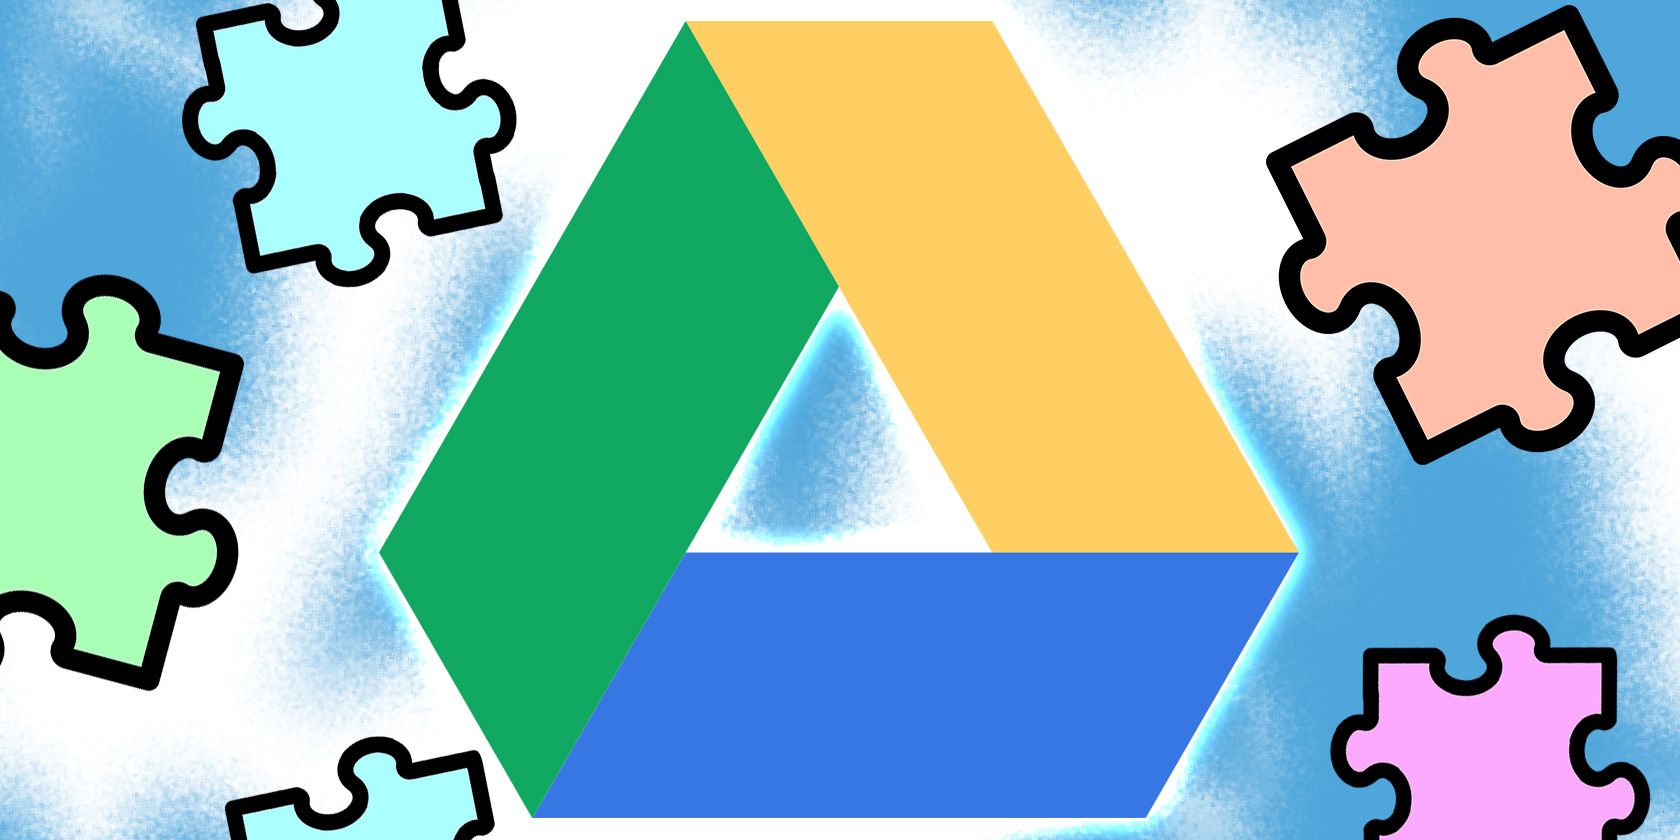 Google Drive logo with puzzles on the side